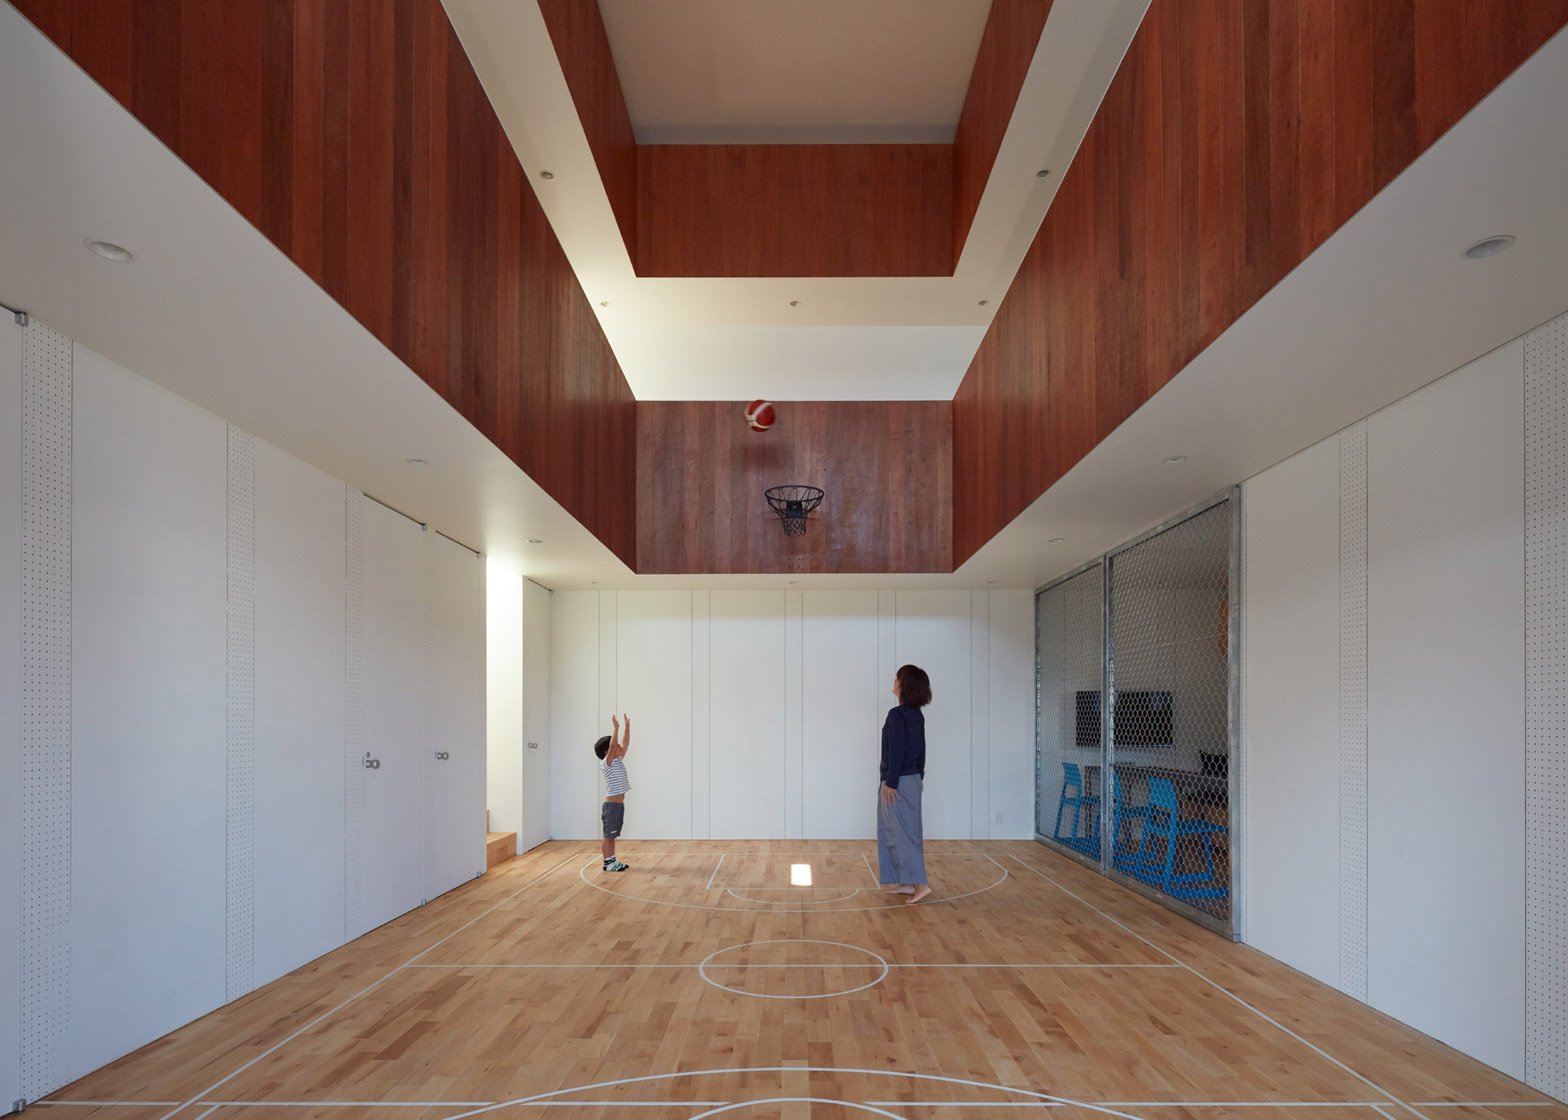 Koizumi Sekkei Designs House In Japan With Basketball Court At Its